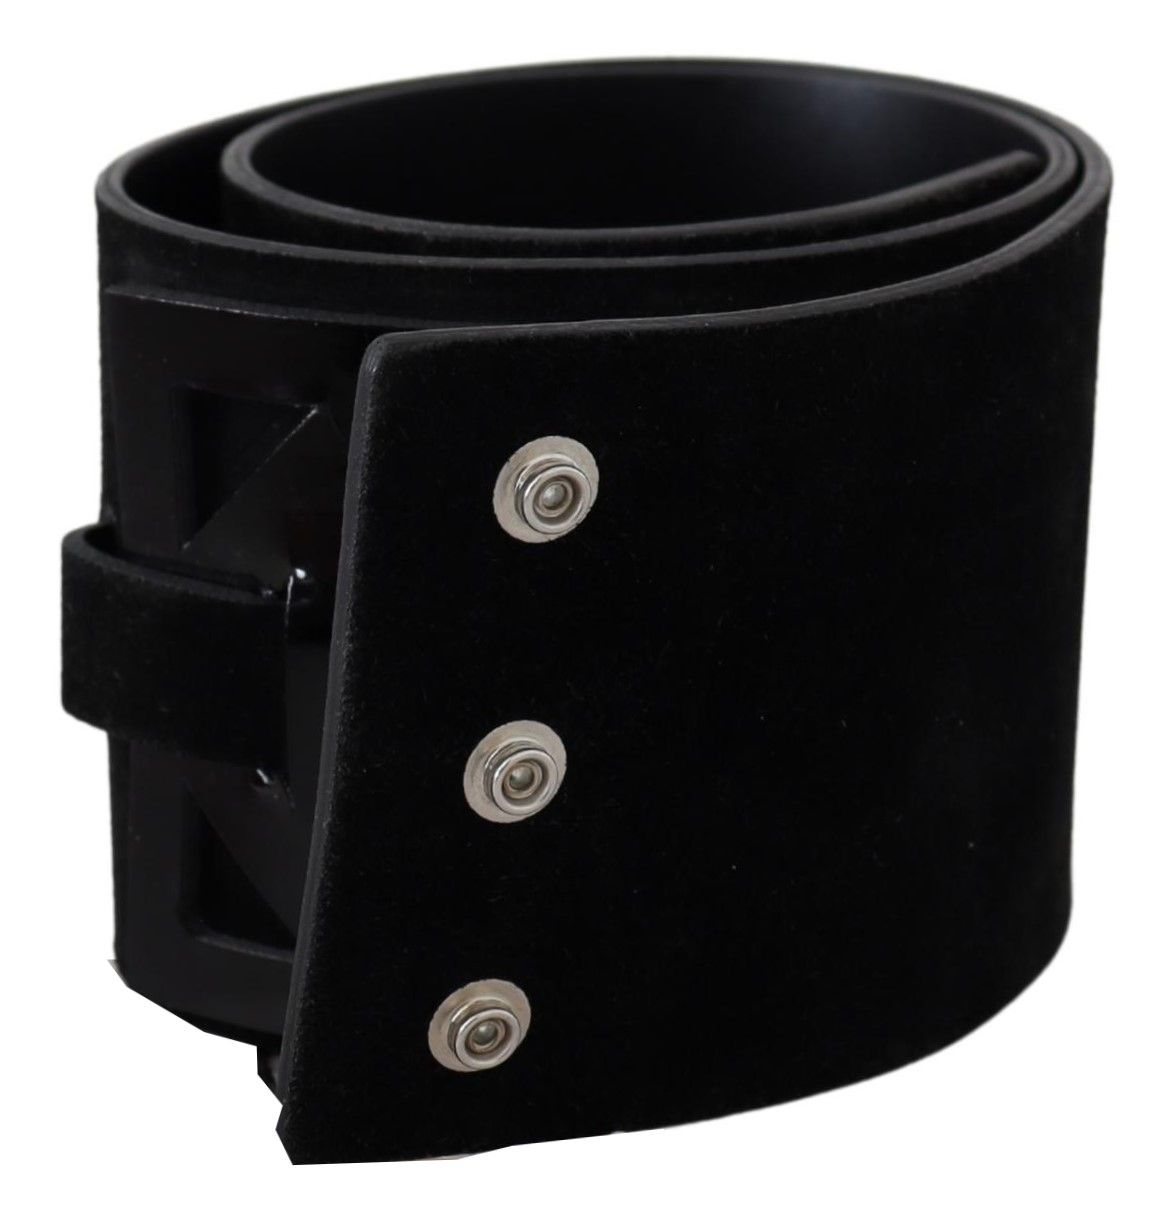 Black Leather Wide Silver Logo Design Buckle Belt - Designed by GF Ferre Available to Buy at a Discounted Price on Moon Behind The Hill Online Designer Discount Store